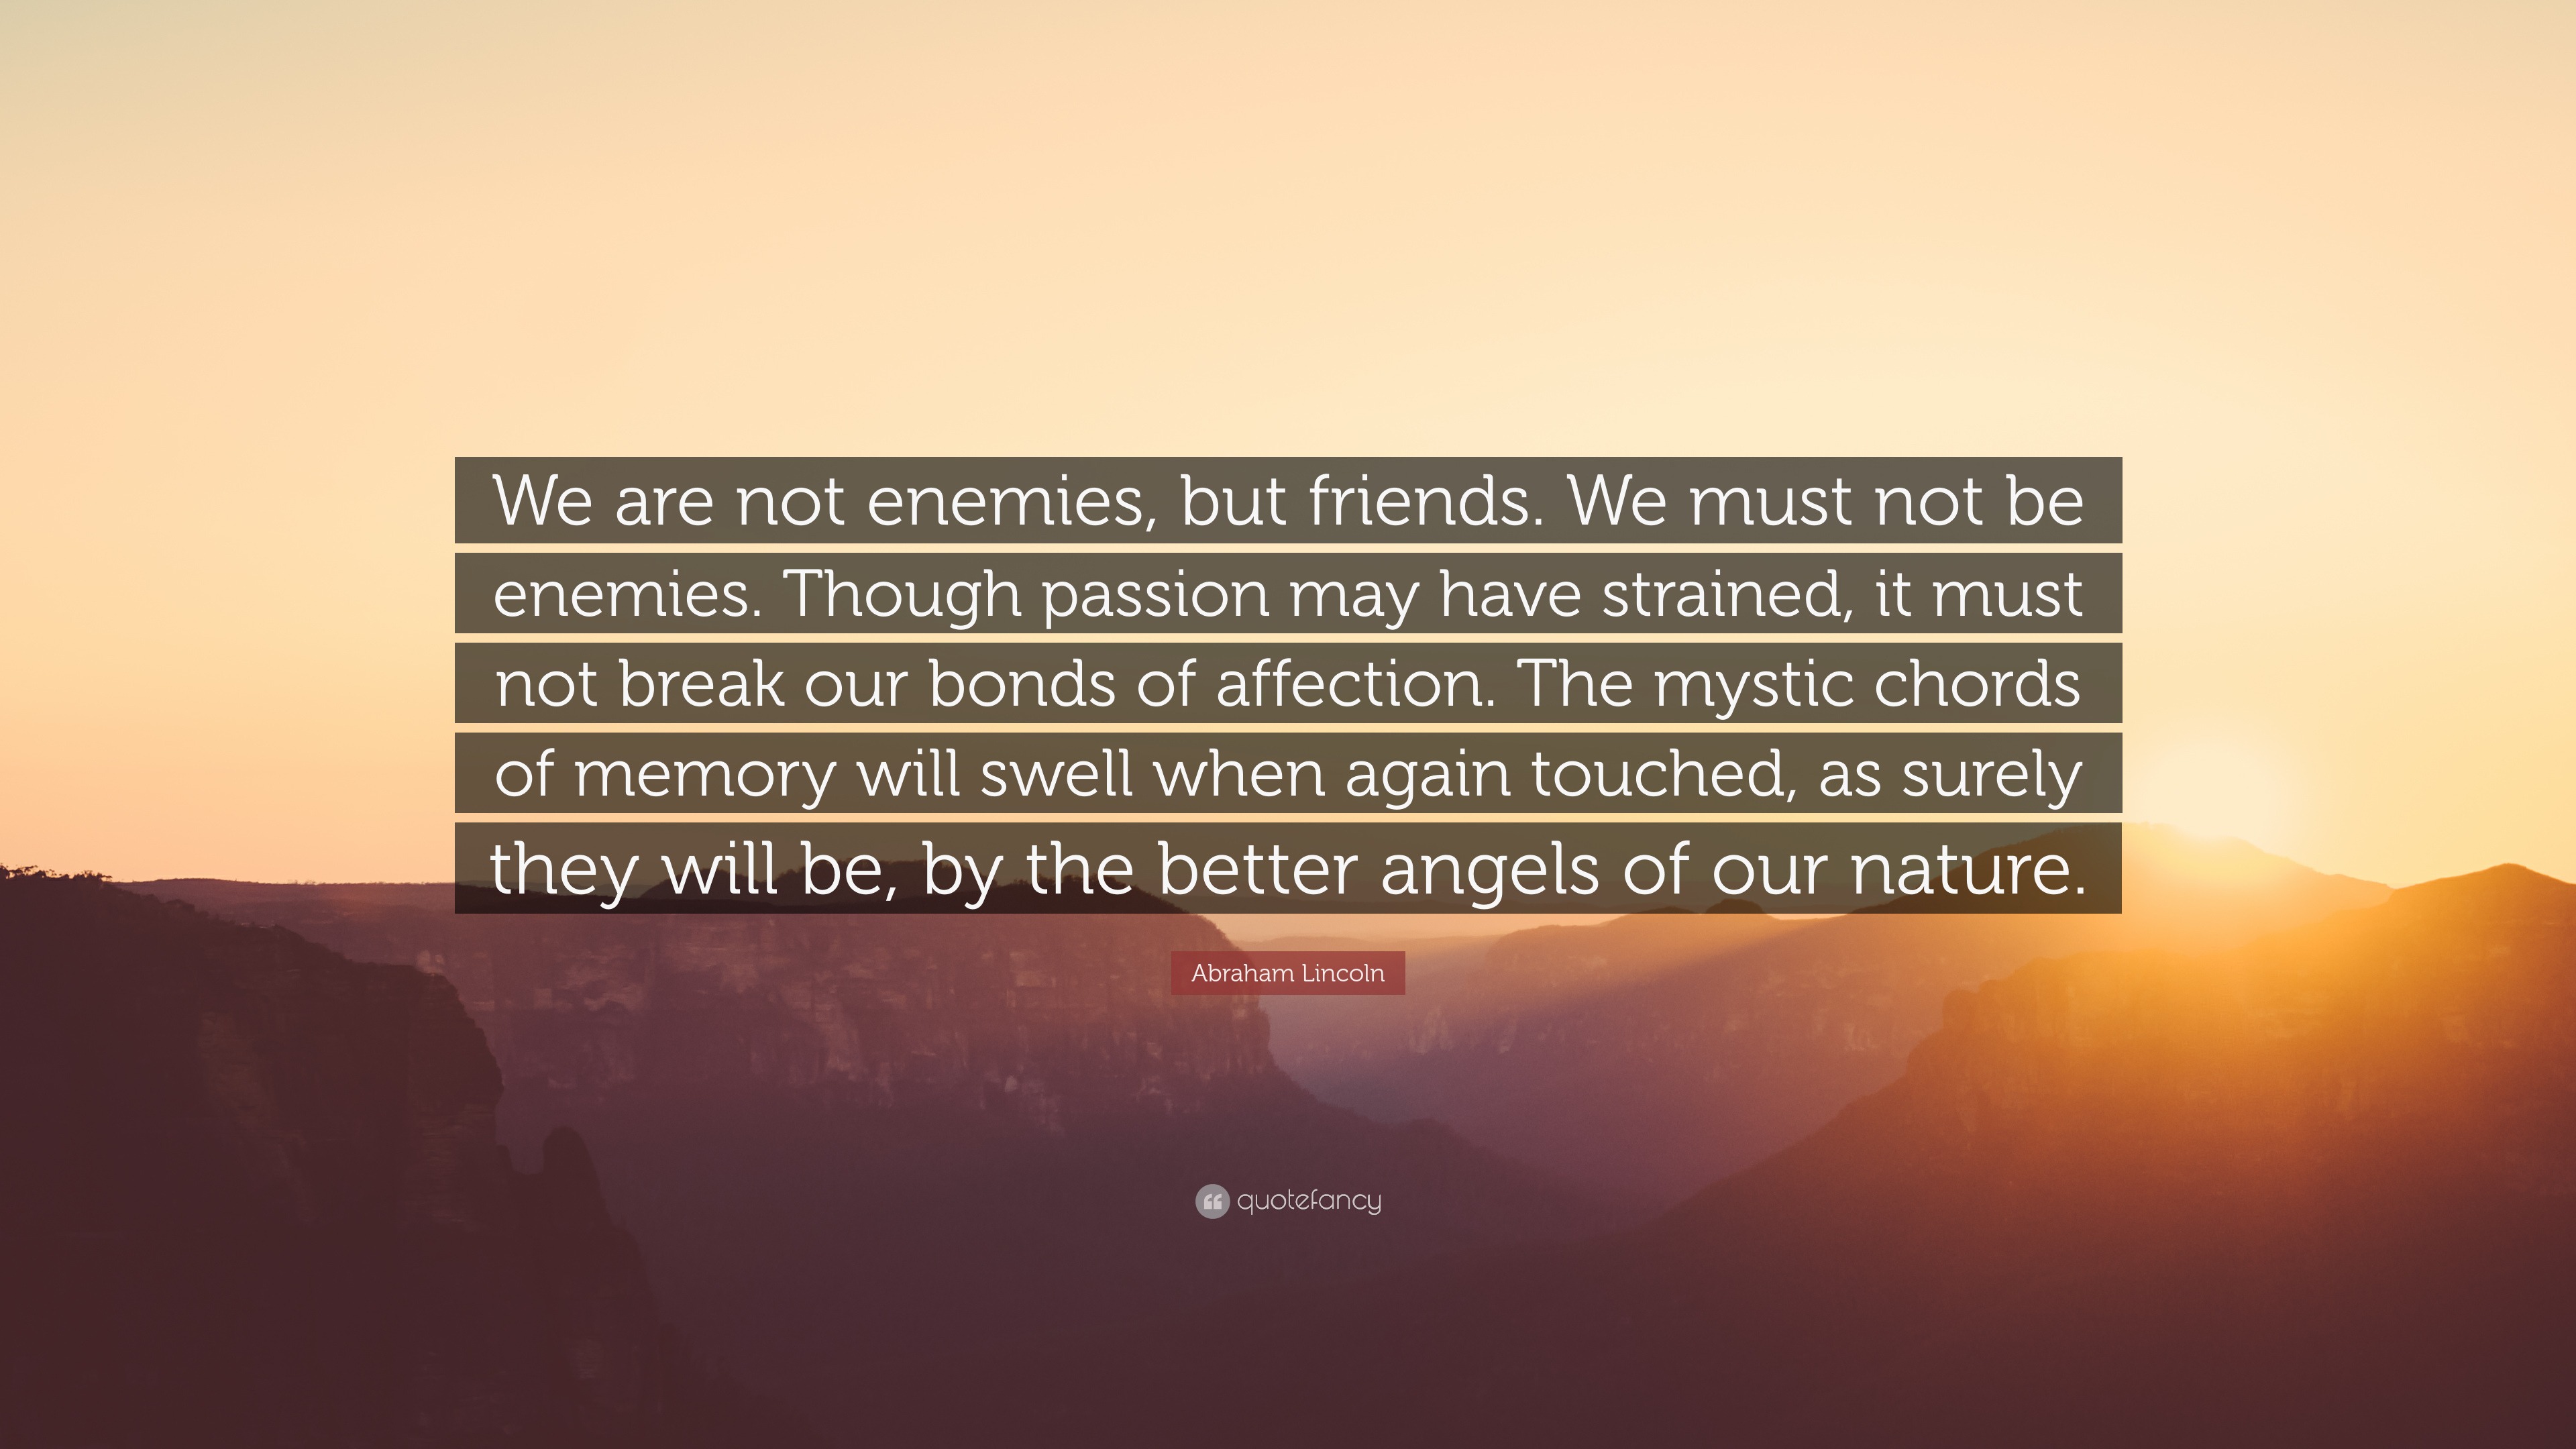 Abraham Lincoln Quote: “We are not enemies, but friends. We must not be enemies. Though passion may have strained, it must not break our o...”